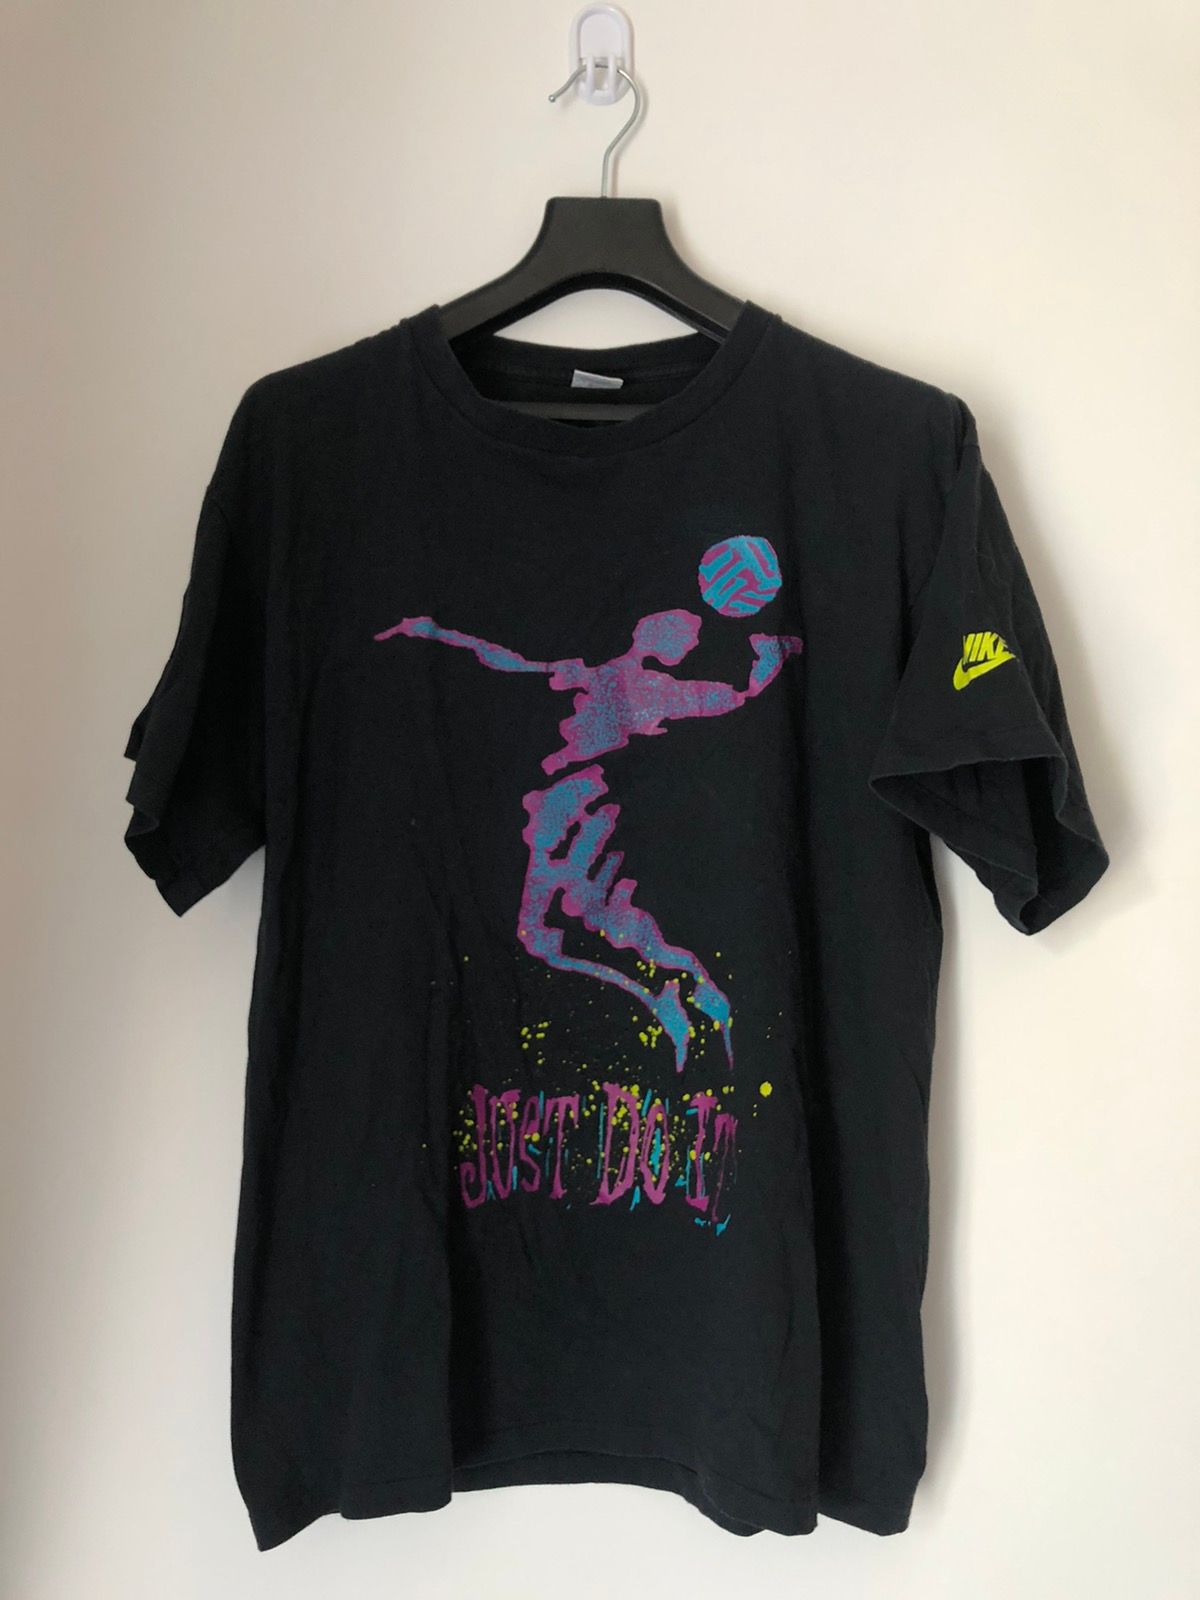 Nike Nike vintage Tee 80s made in USA Size US XXL / EU 58 / 5 - 1 Preview